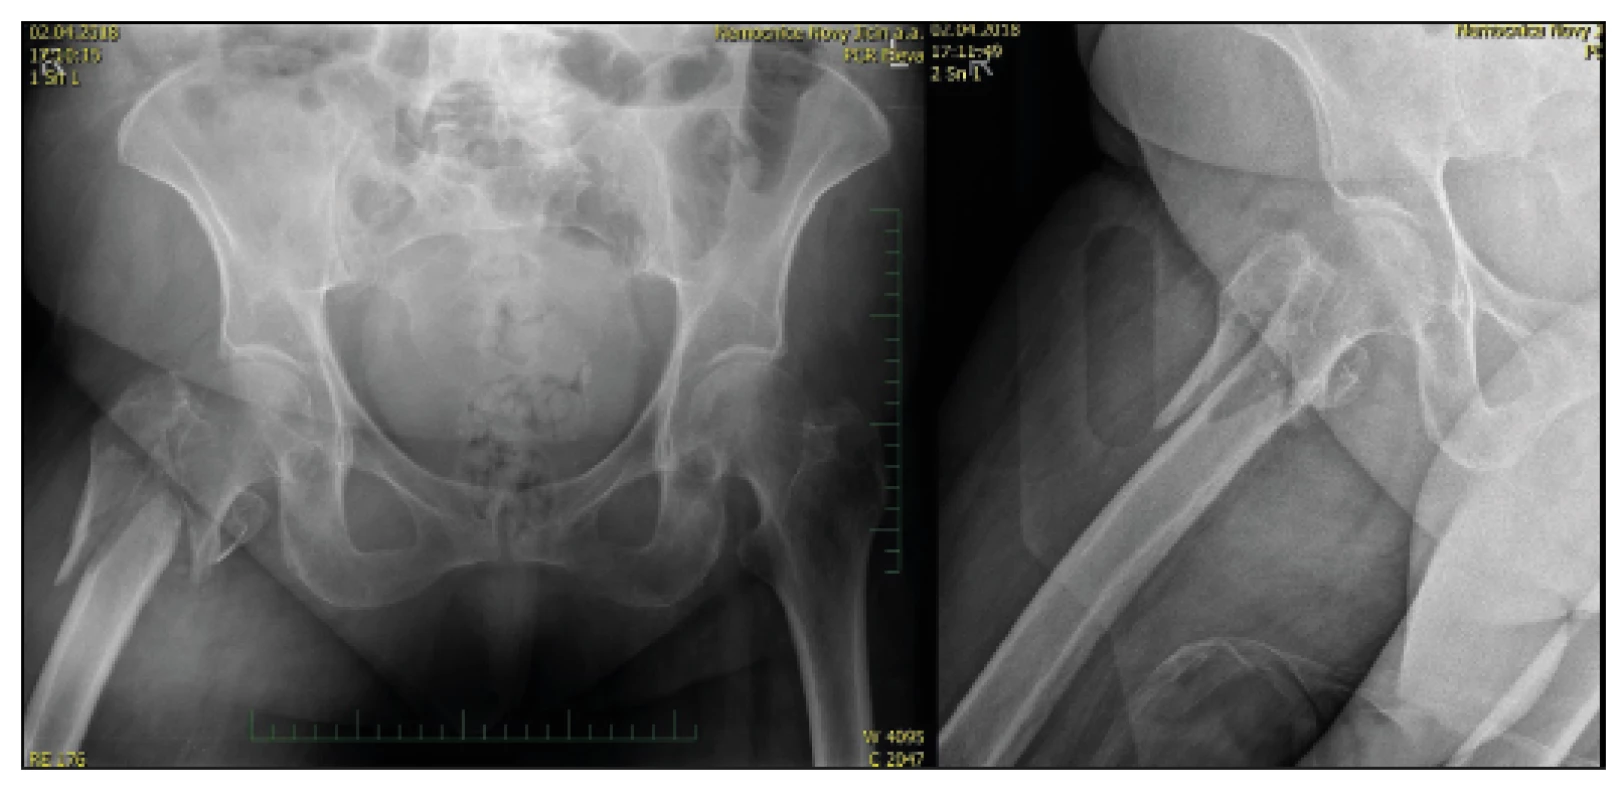 76-year-old female with comminuted fracture of the trochanteric
massive, trauma X-ray